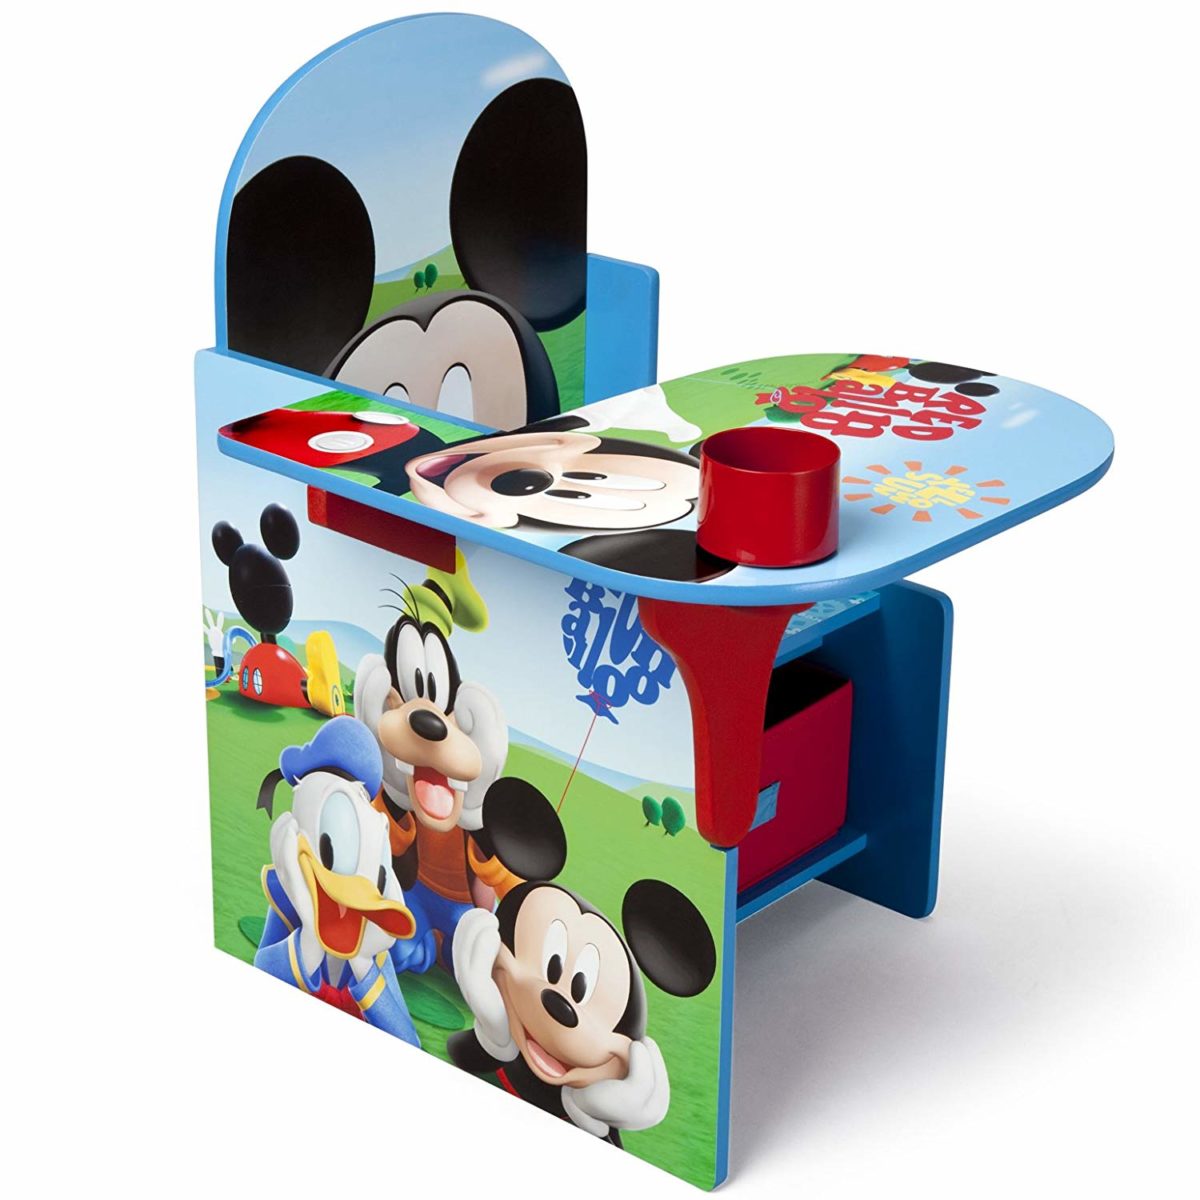 Delta Children Chair Desk With Storage Bin - Top Toys and Gifts for Four Year Old Boys 2